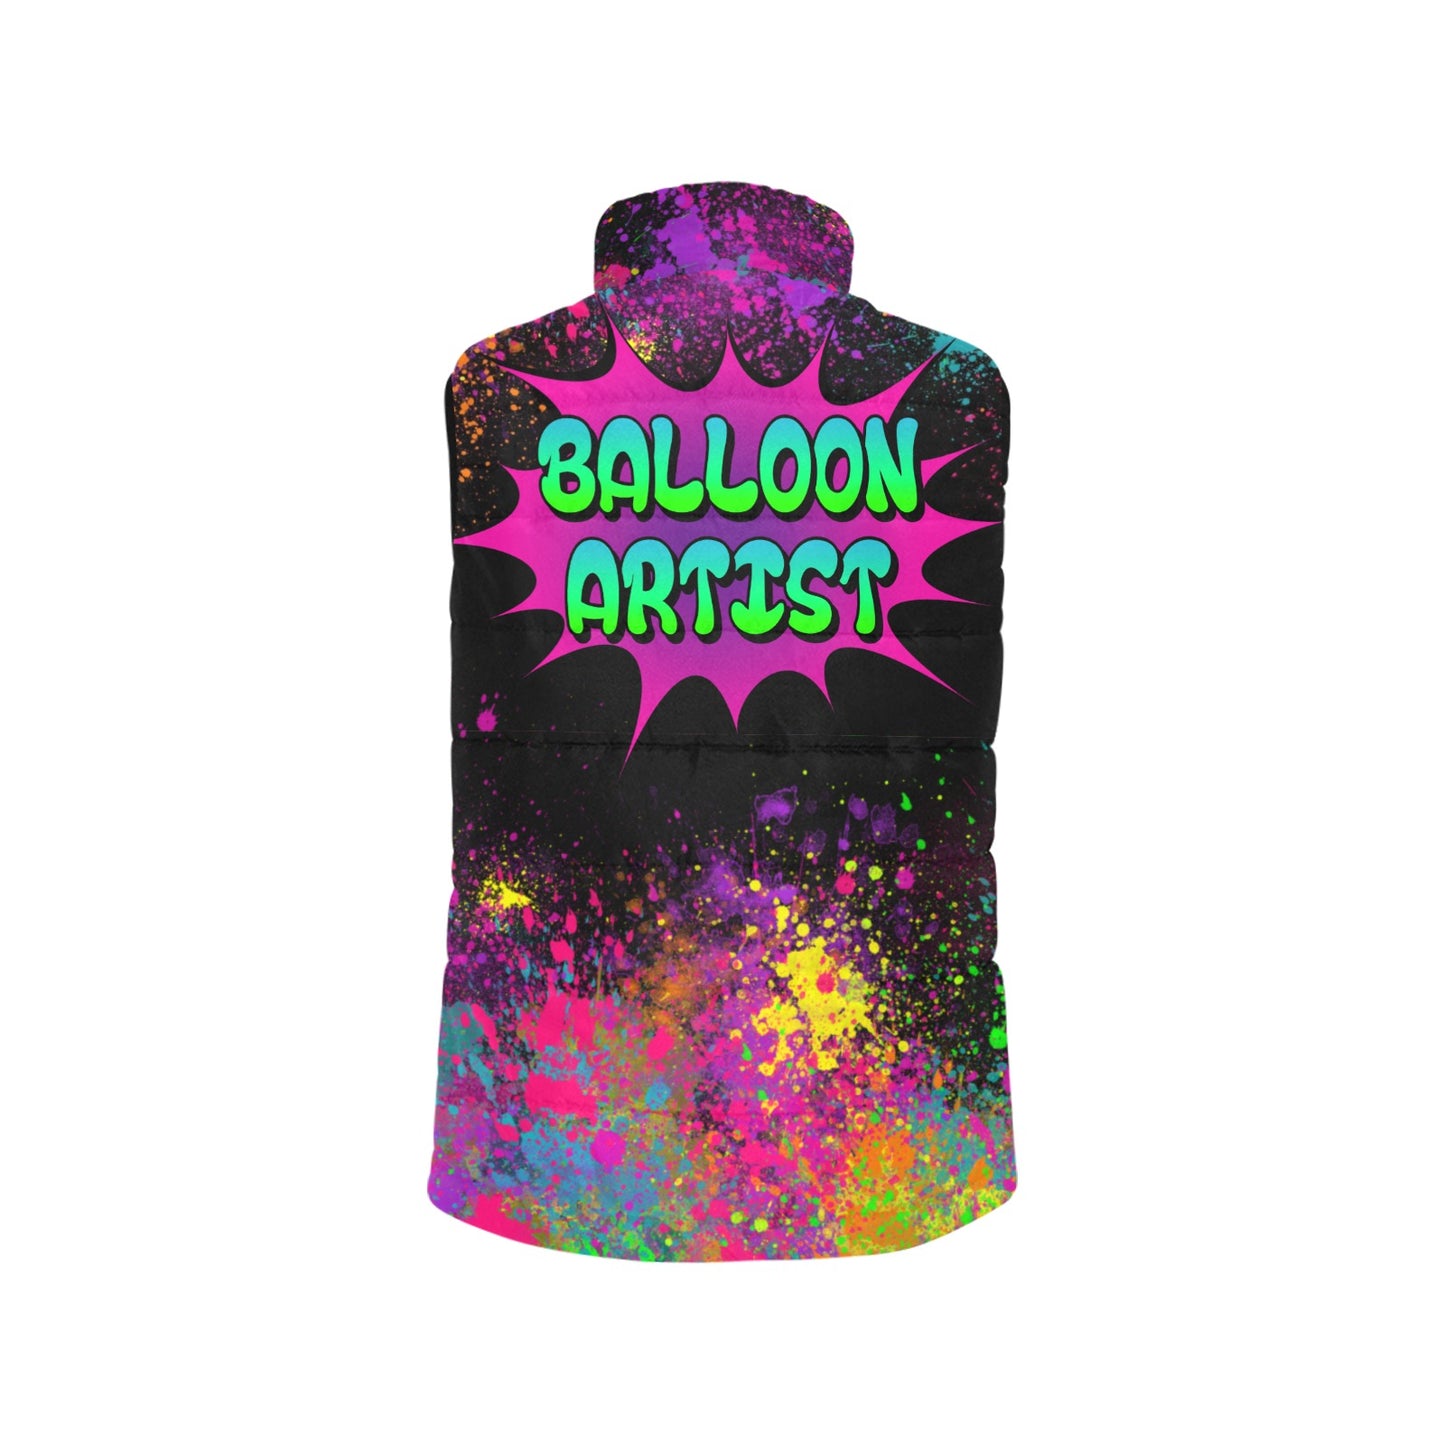 Balloon twisting and face painting vest